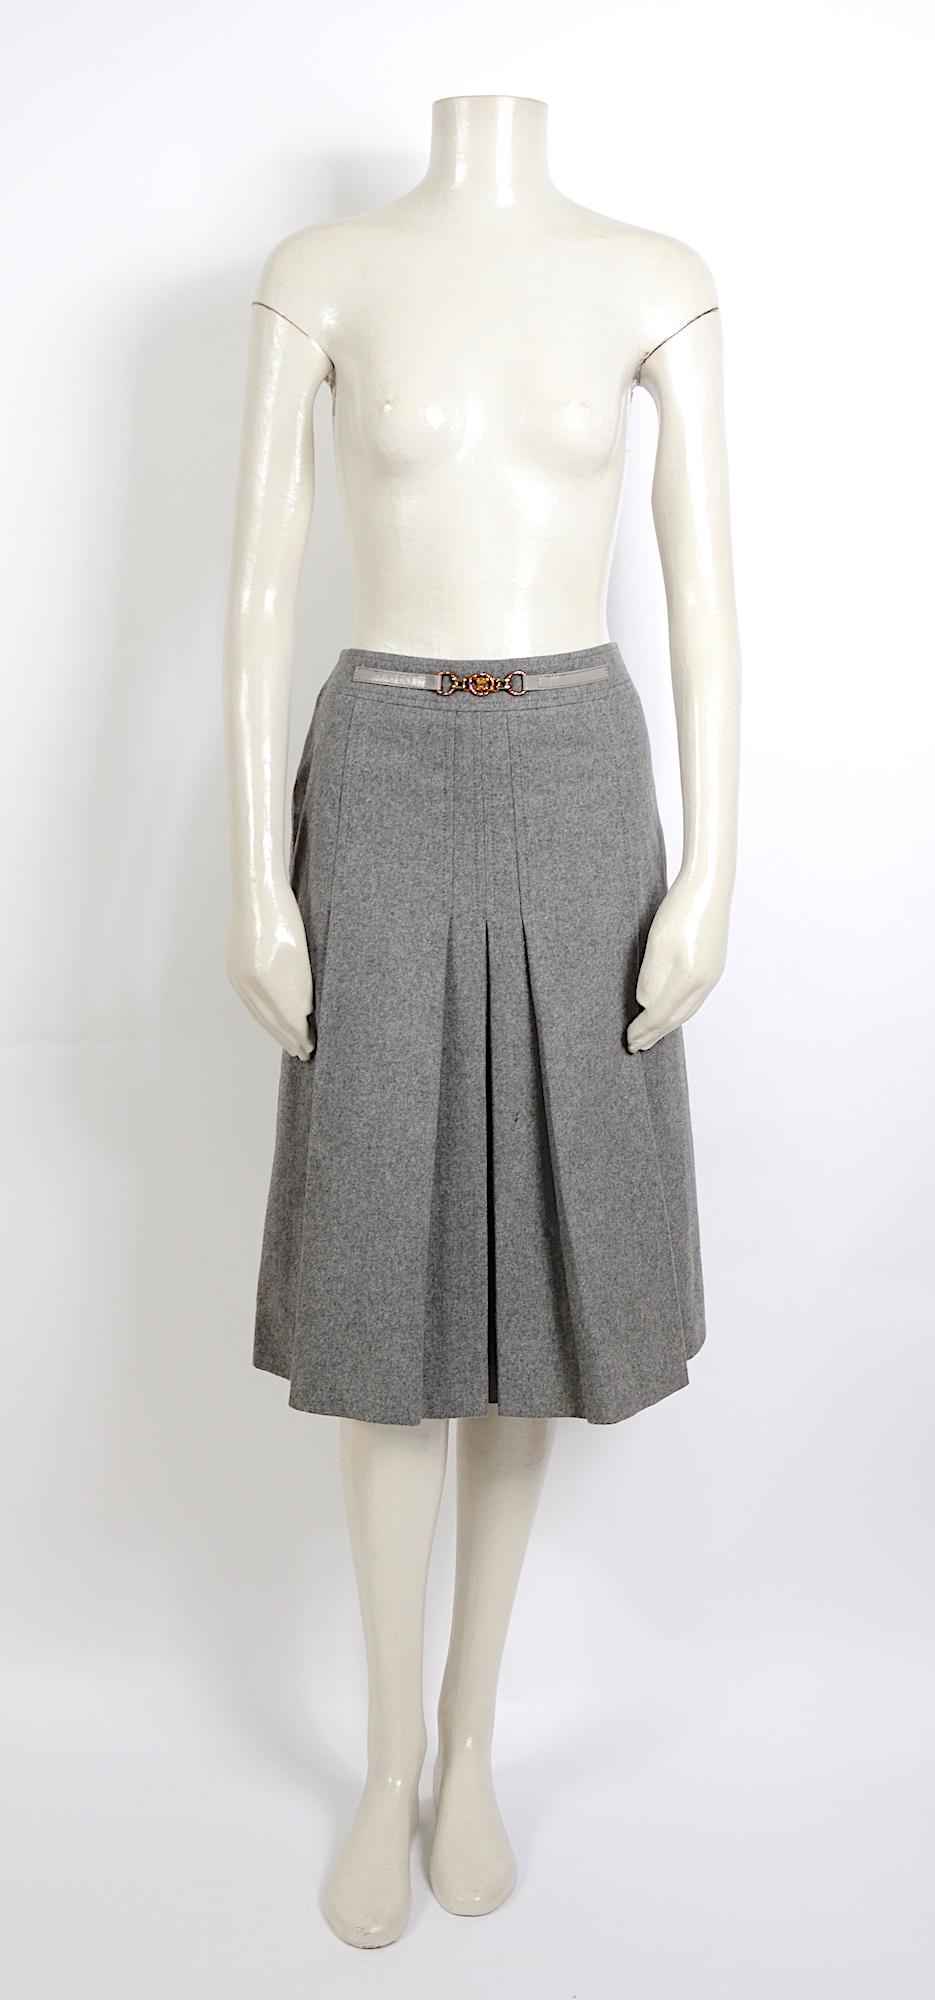 Céline Paris grey wool pleated skirt with attached belt logo belt detail.
The front is adorned with a fixed grey leather belt with a gold buckle that features the Celine logo. The skirt is lined and in good vintage condition.
the skirt was pinned on